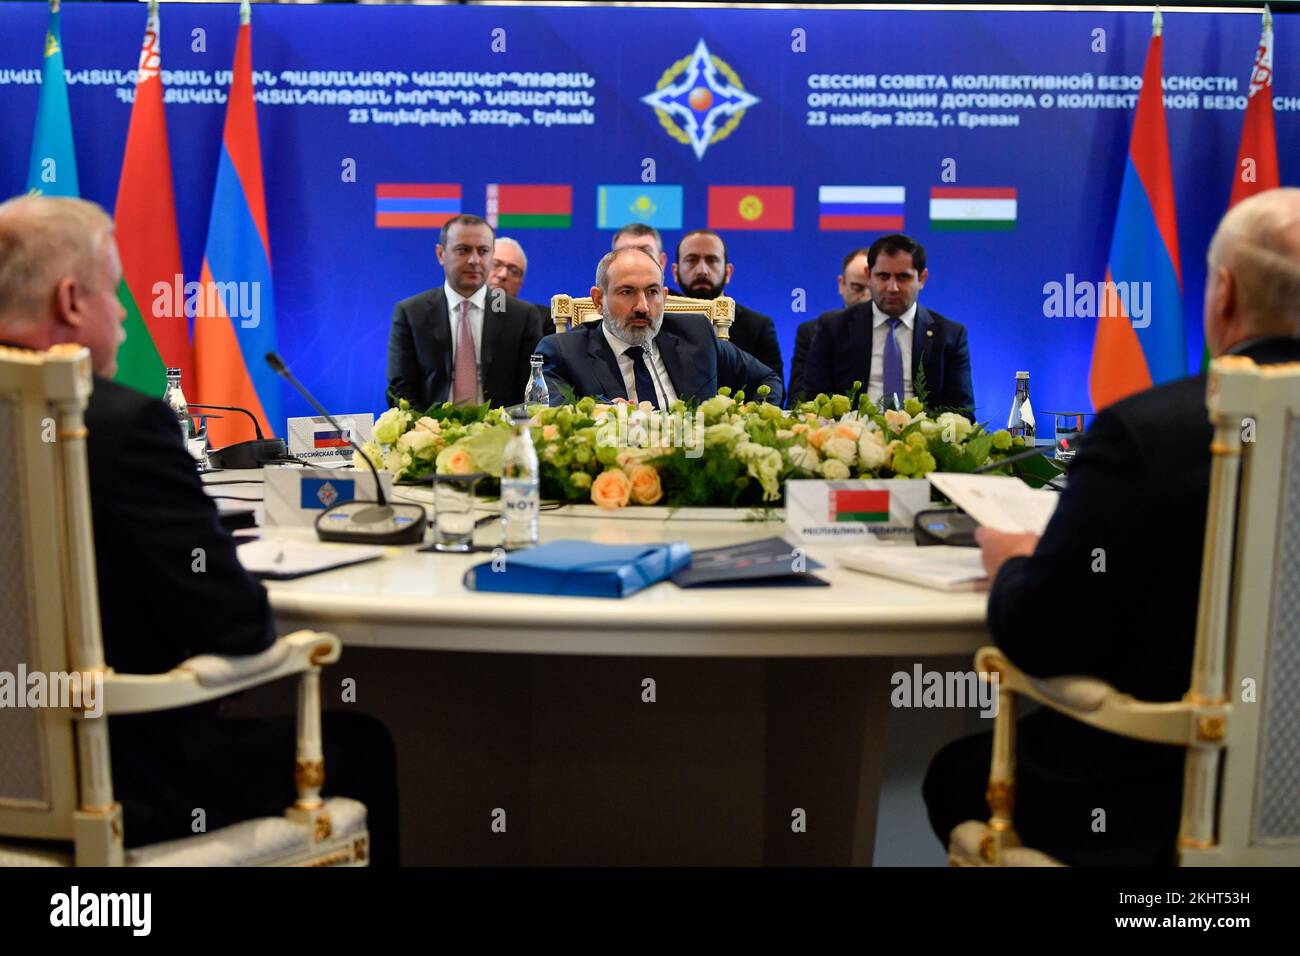 (221124) -- YEREVAN, Nov. 24, 2022 (Xinhua) -- A meeting of the Collective Security Council, the highest body of the Collective Security Treaty Organization (CSTO), is held in Yerevan, Armenia, Nov. 23, 2022.  Leaders of the six member countries of the CSTO on Wednesday exchanged views here on strengthening security cooperation and stabilizing the region, reported the state-run news agency Armenpress. (Photo by Asatur Yesayants/Xinhua) Stock Photo